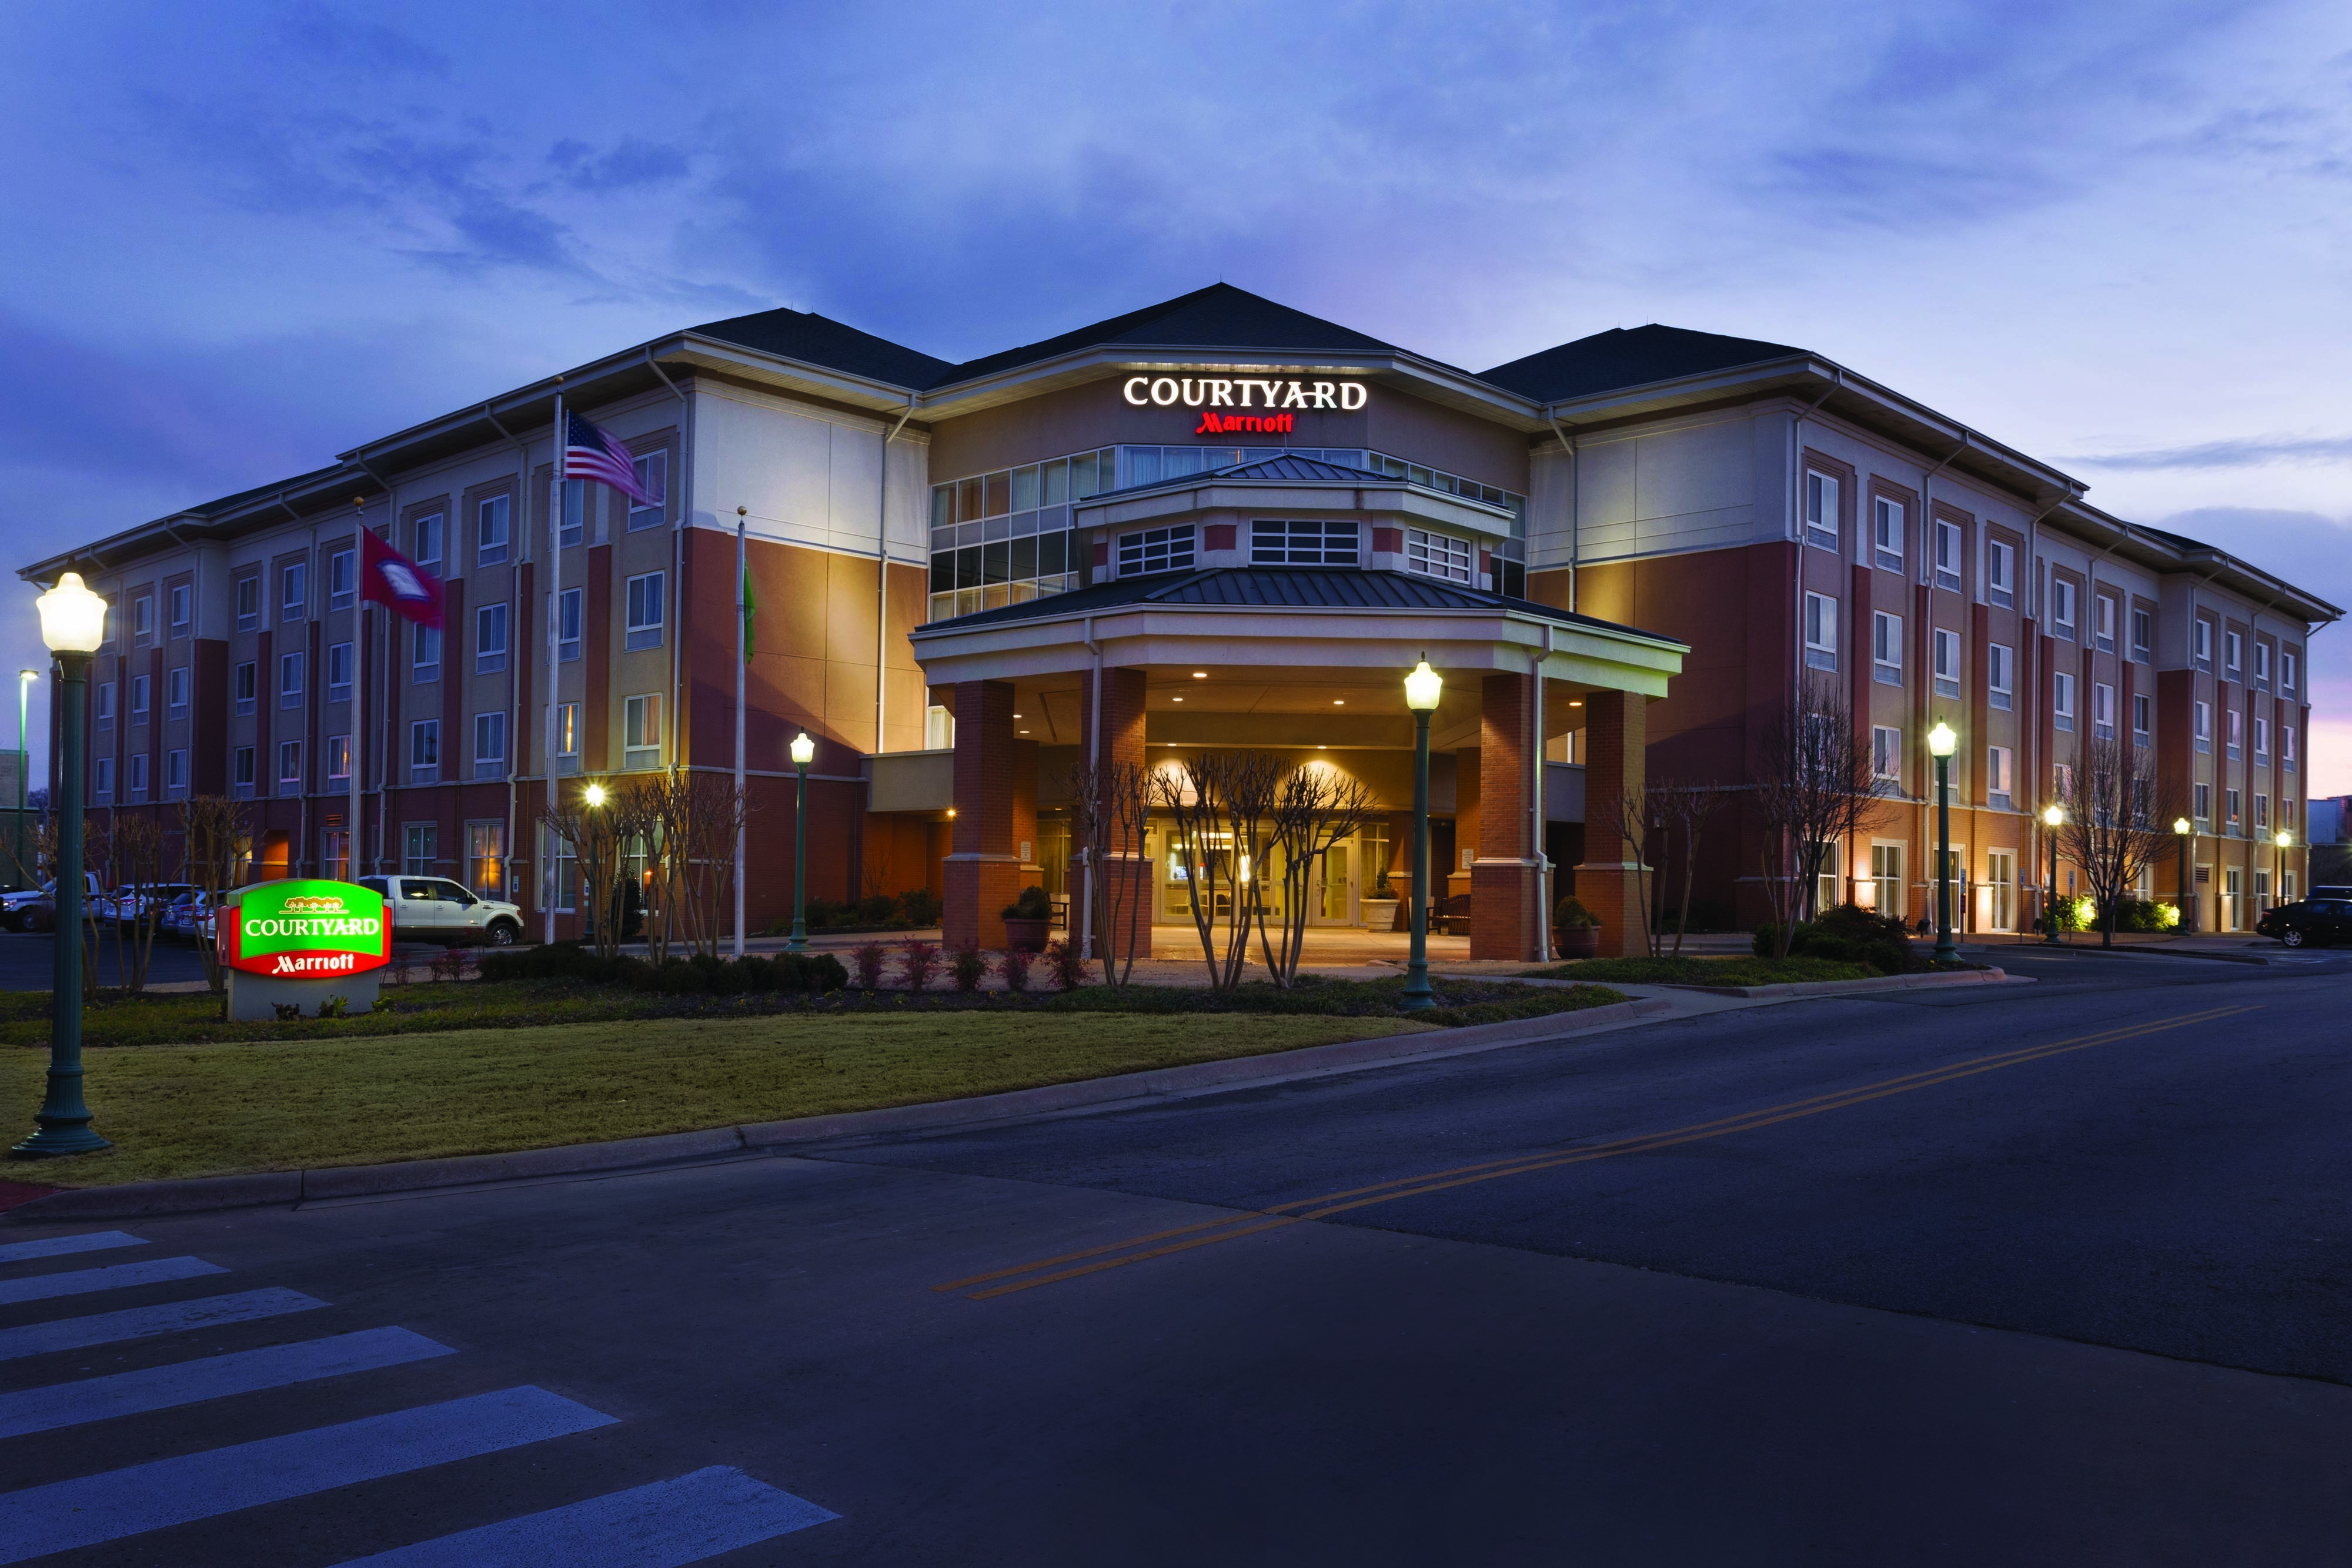 Photo of Courtyard by Marriott Fort Smith Downtown, Fort Smith, AR